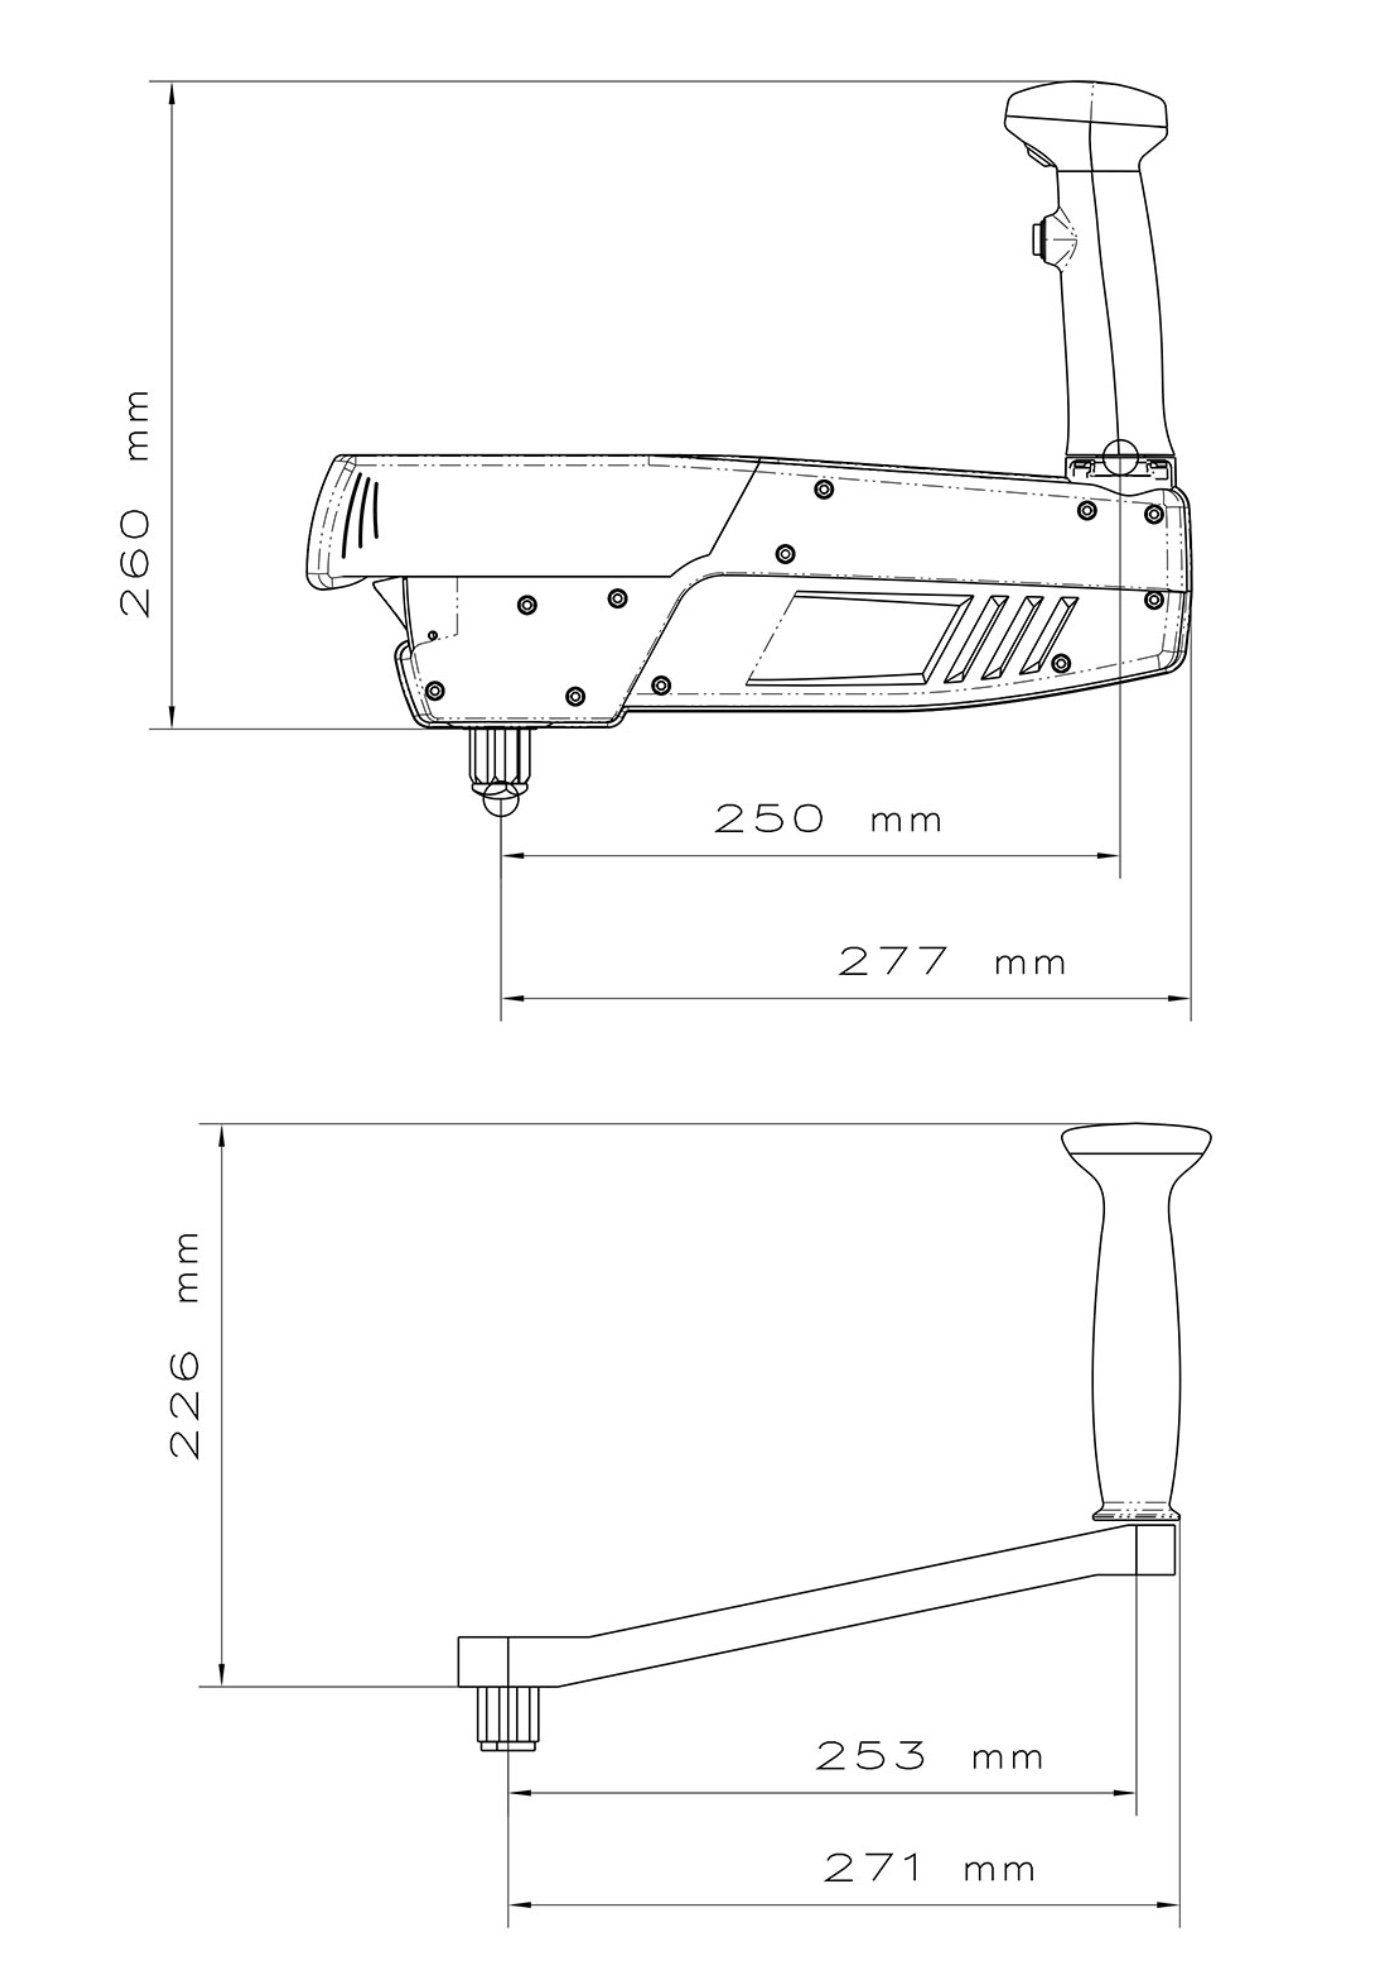 The Ewincher 2, the electric winch handle